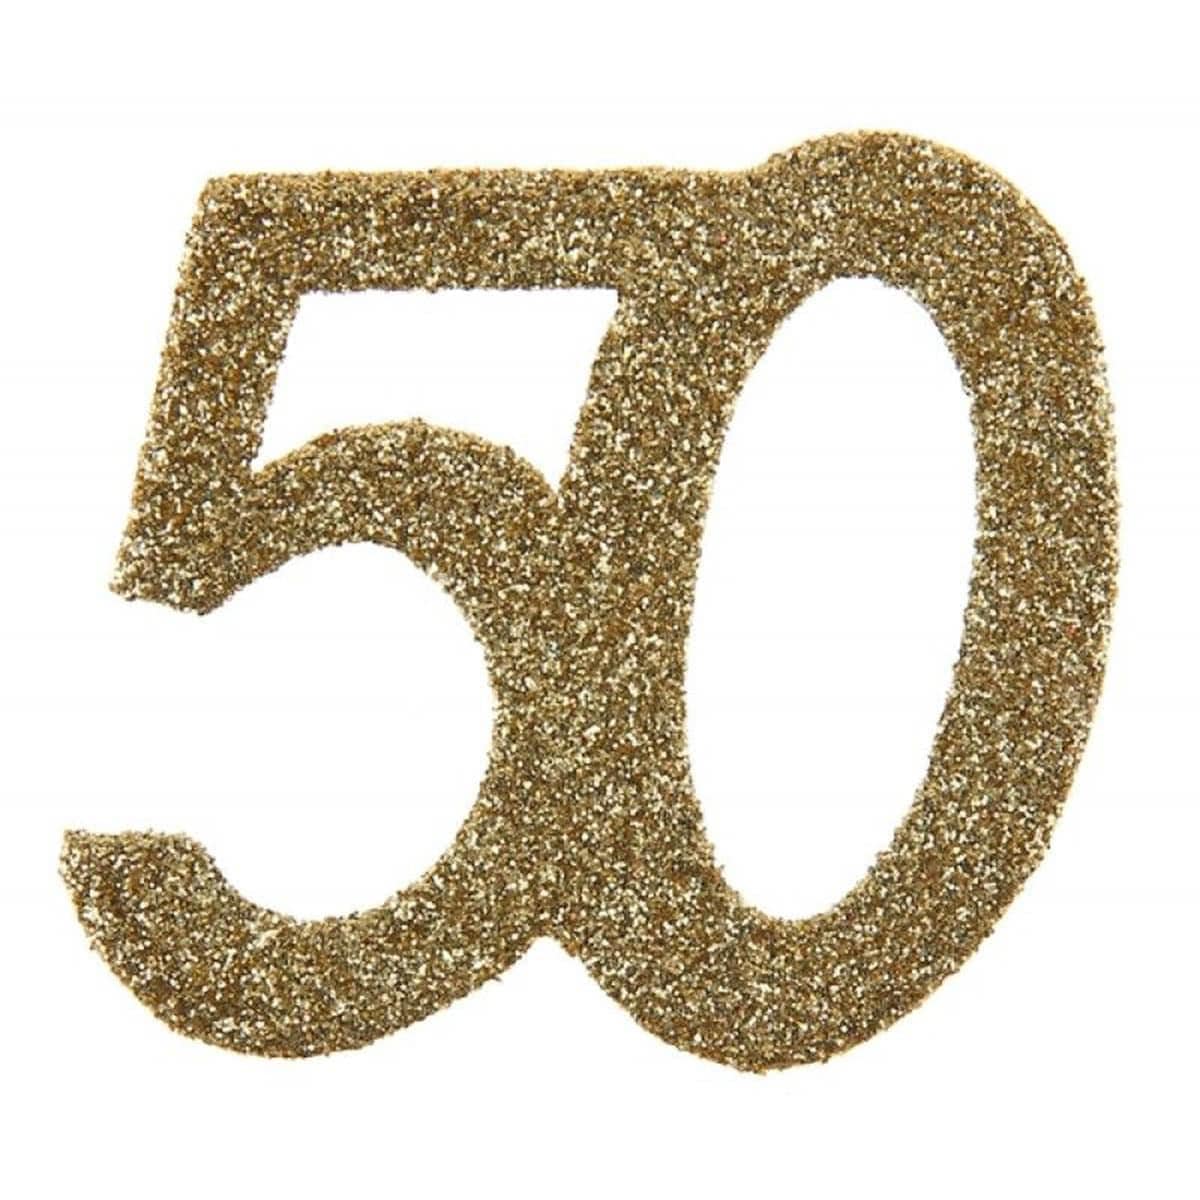 SANTEX Age Specific Birthday Glittery Number 50 Decoration, Gold, 6 Count